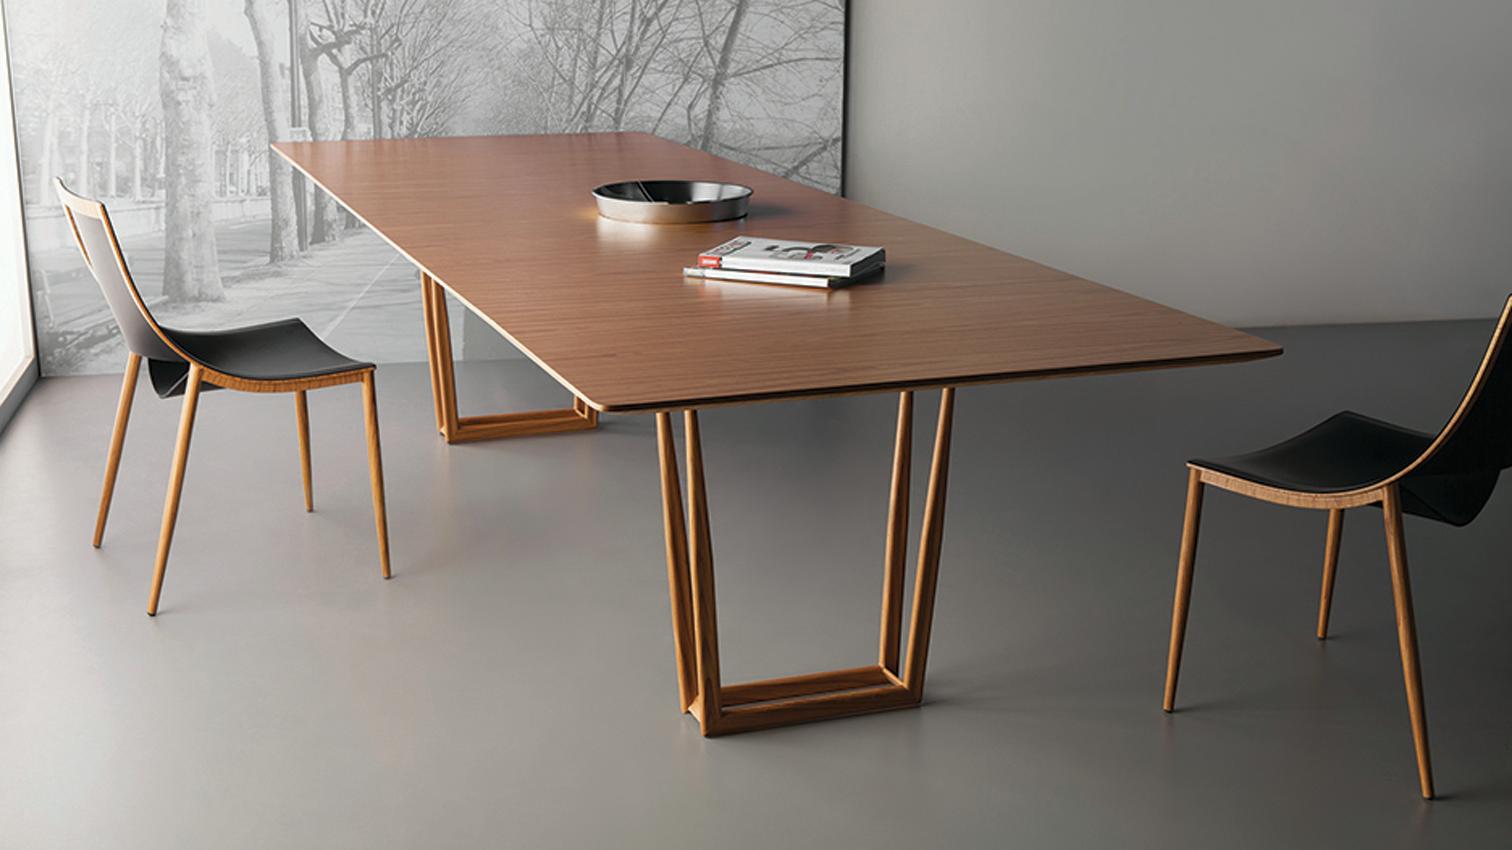 Slim Dining Table by Doimo Brasil
Dimensions: W 220 x D 110 x H 75 cm 
Materials: Base: Veneer, Top: Veneer or lacquer. 

Also available in other dimensions. Please contact us.

With the intention of providing good taste and personality, Doimo